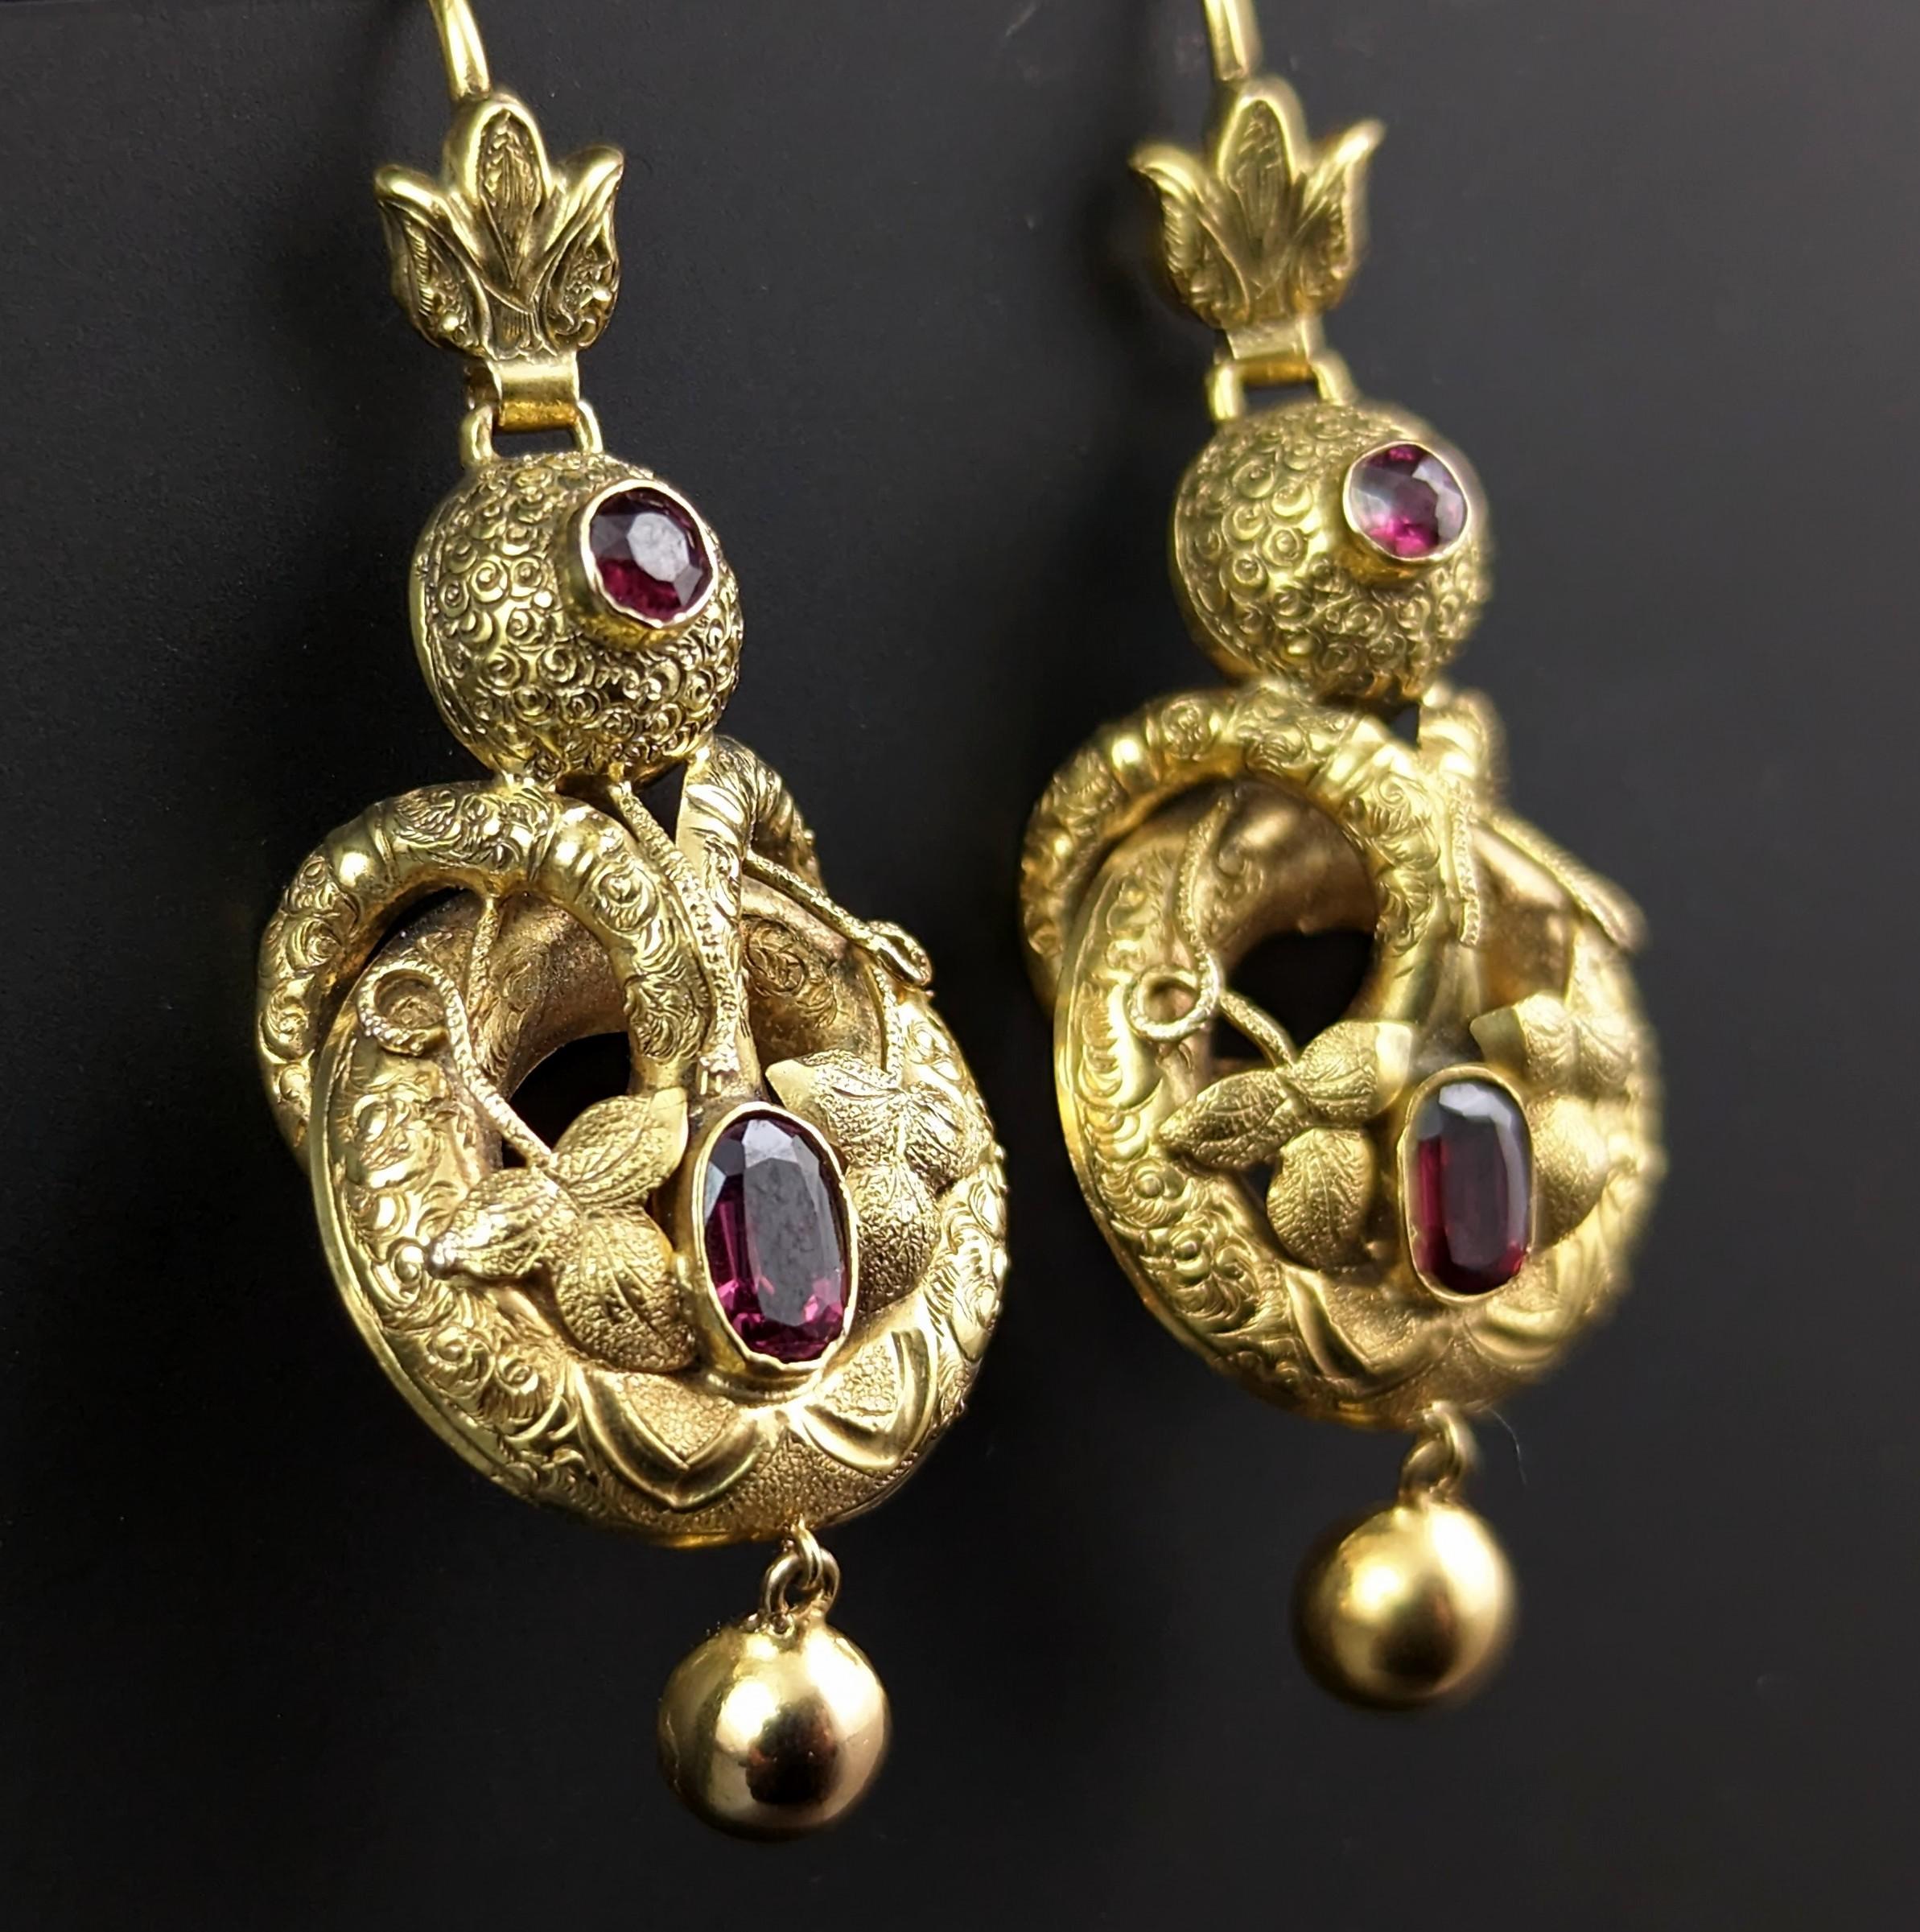 Antique Victorian Garnet Drop Earrings, 18 Carat Gold, Leaves and Vine For Sale 5